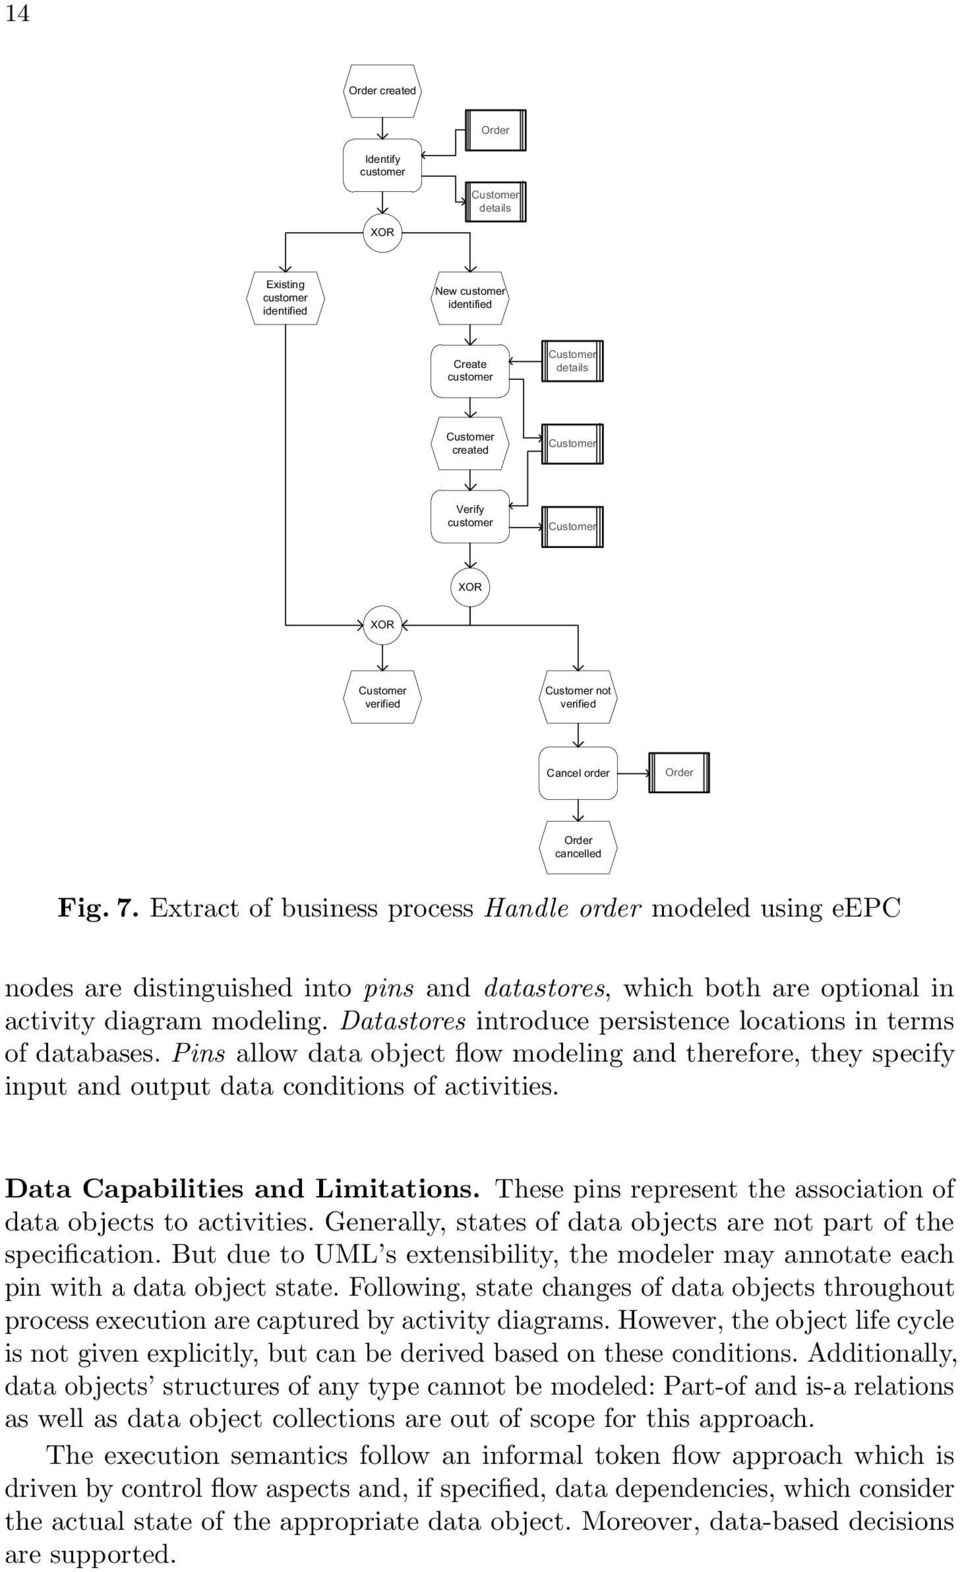 Extract of business process Handle order modeled using eepc nodes are distinguished into pins and datastores, which both are optional in activity diagram modeling.